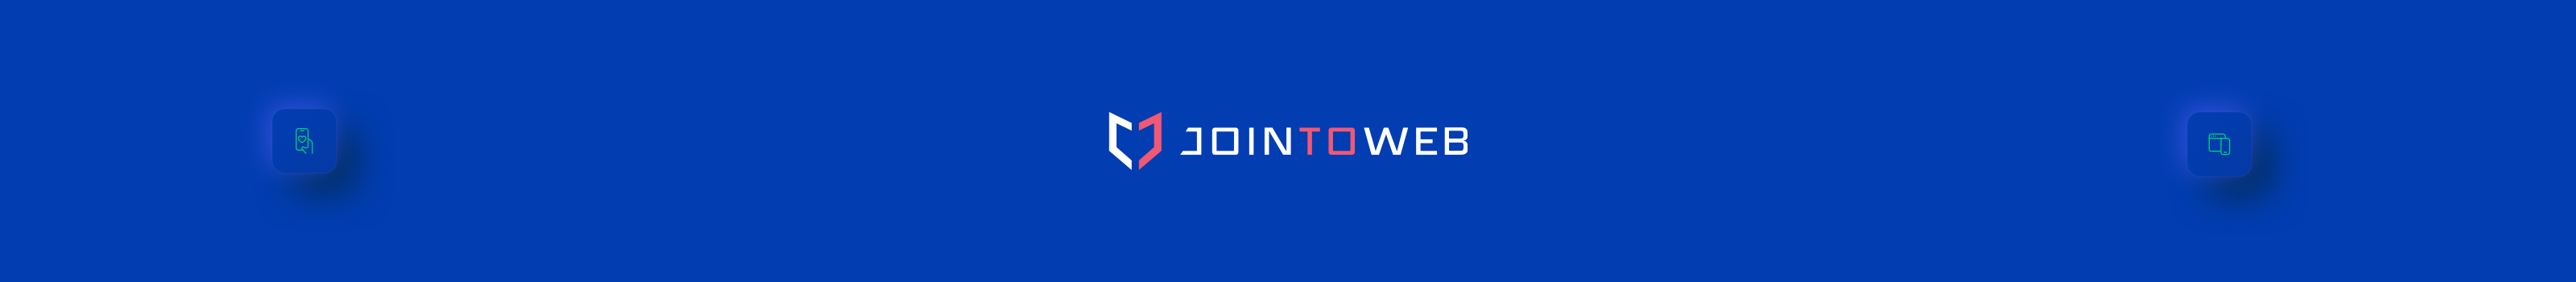 Jointoweb 🛡's profile banner